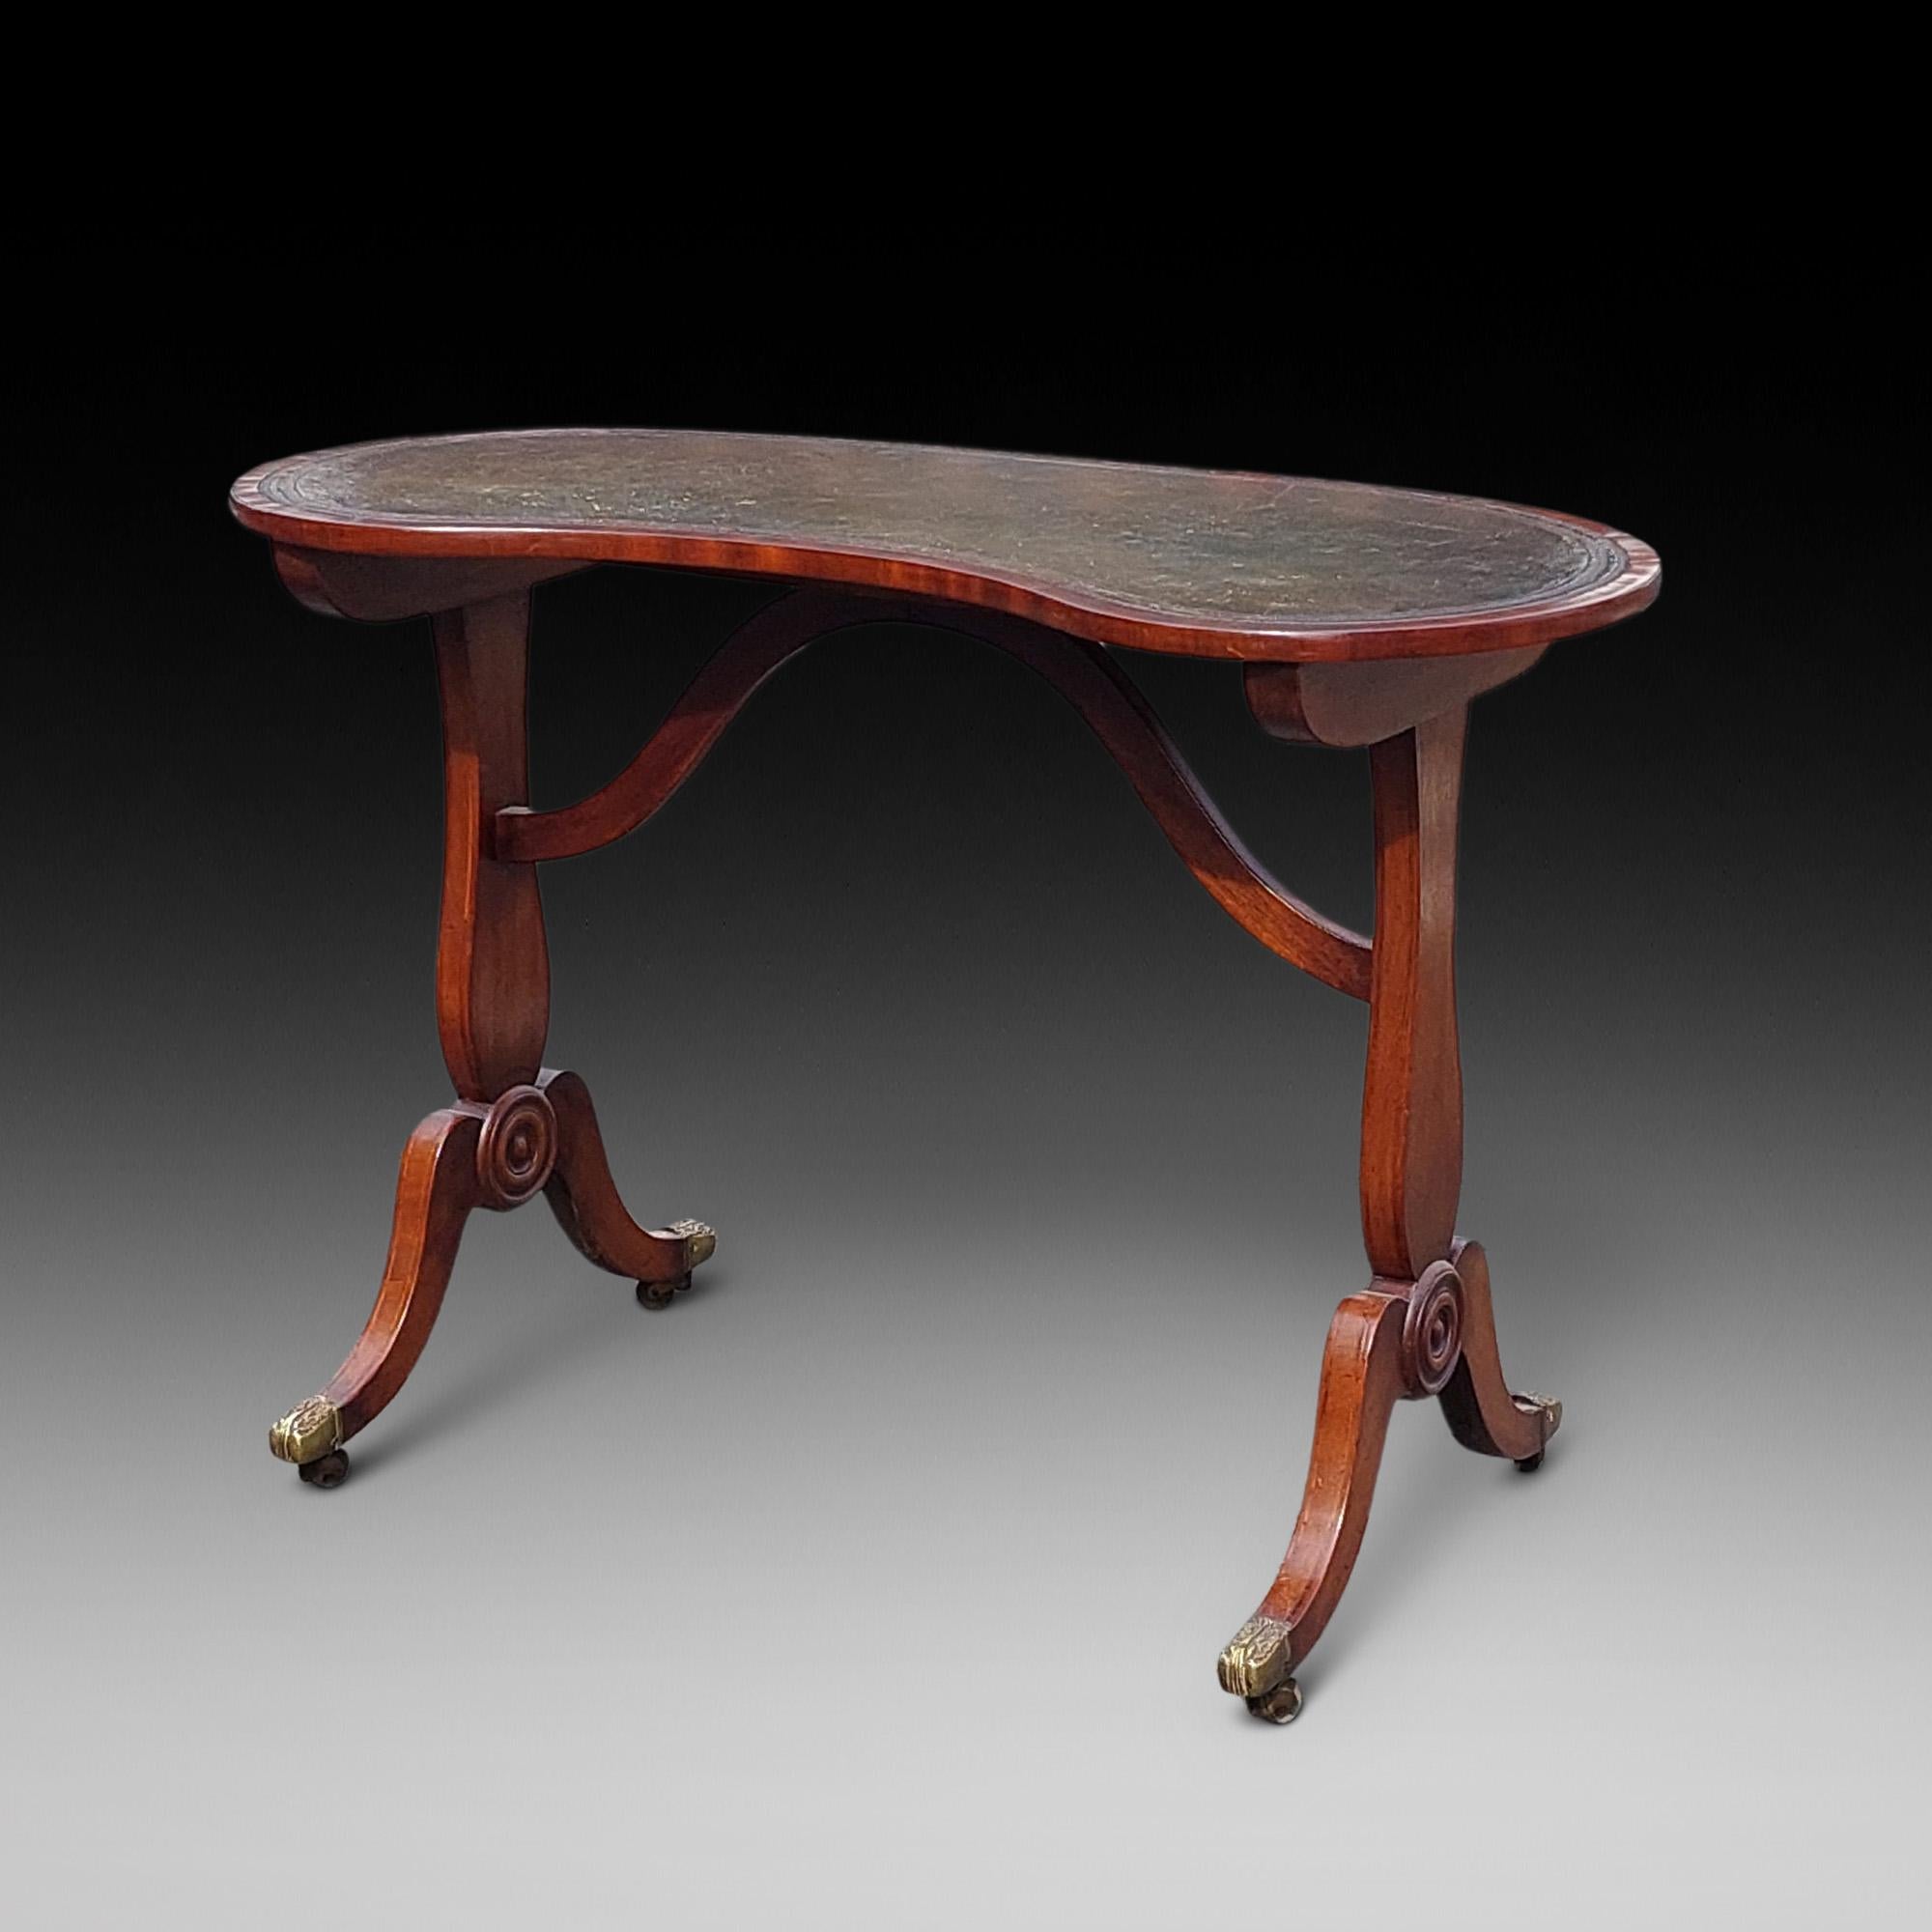 George III Kidney Shaped Open Writing Table with High Stretcher between End Supports on Sabre Legs and Brass Castors 40